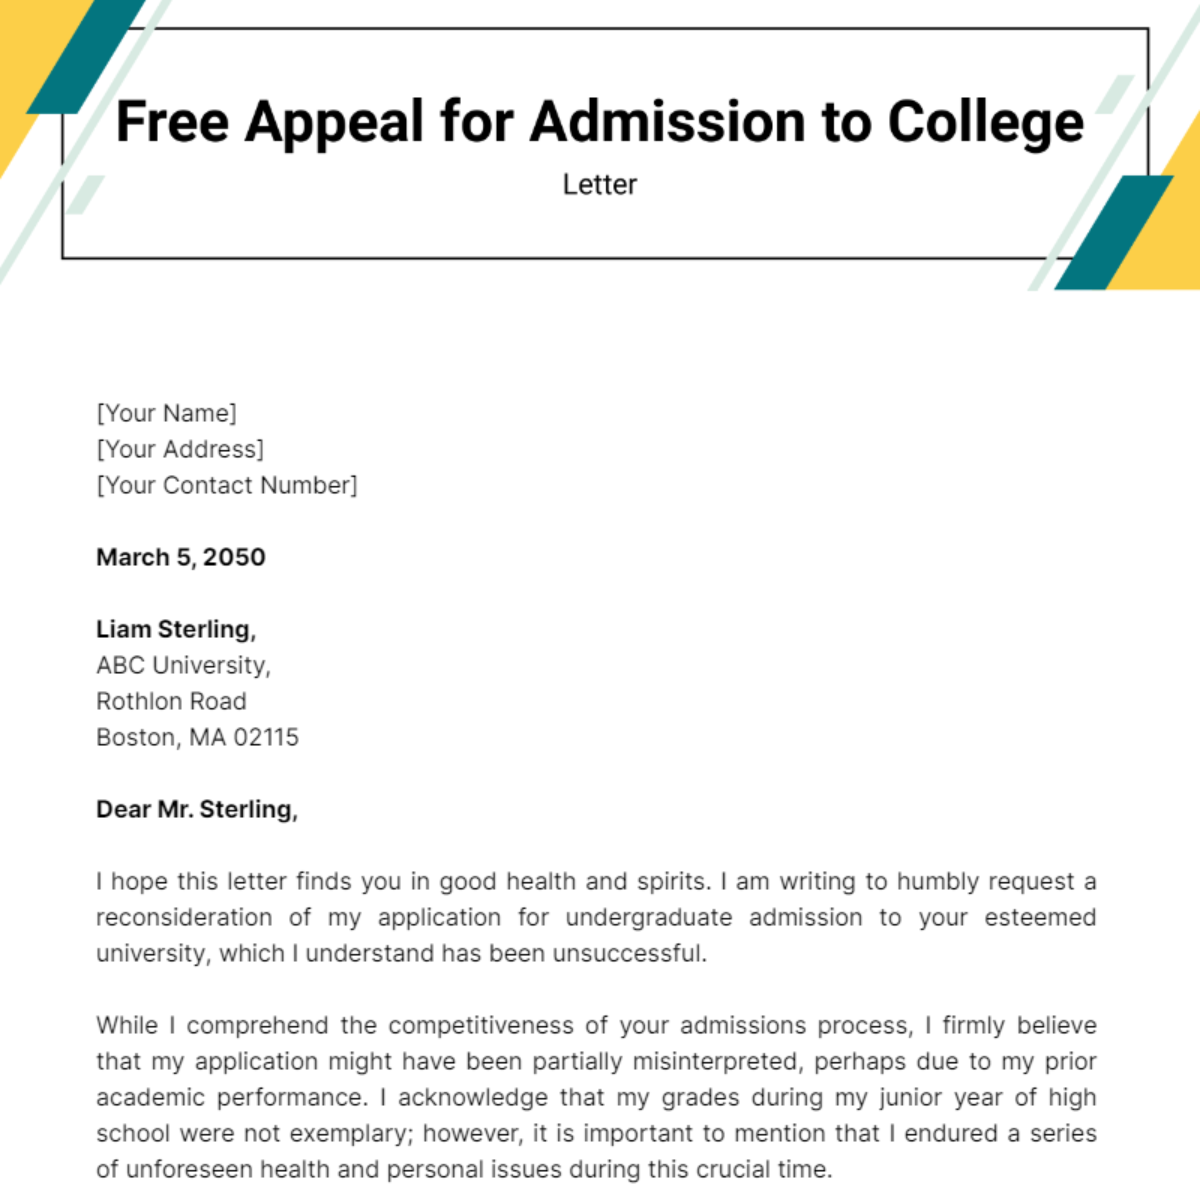 Appeal for Admission to College Letter Template